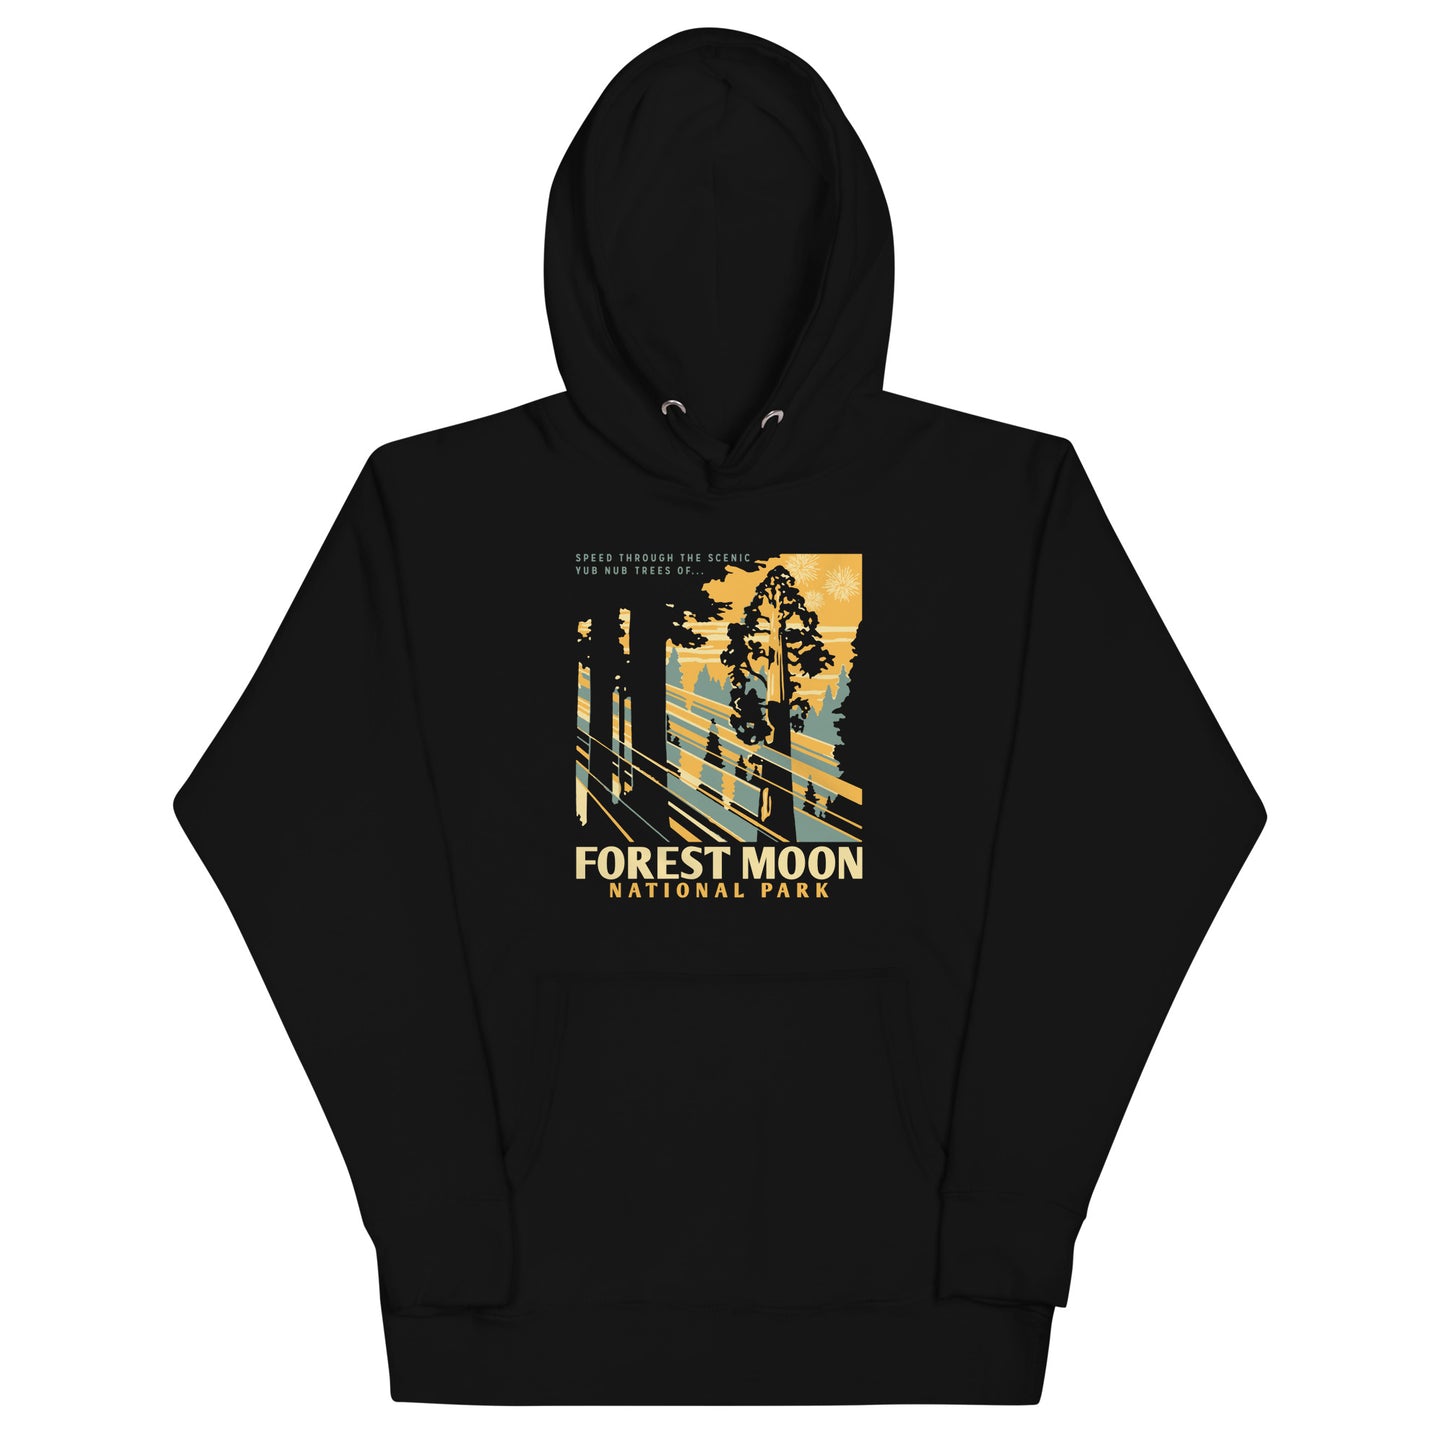 Forest Moon National Park Unisex Hoodie